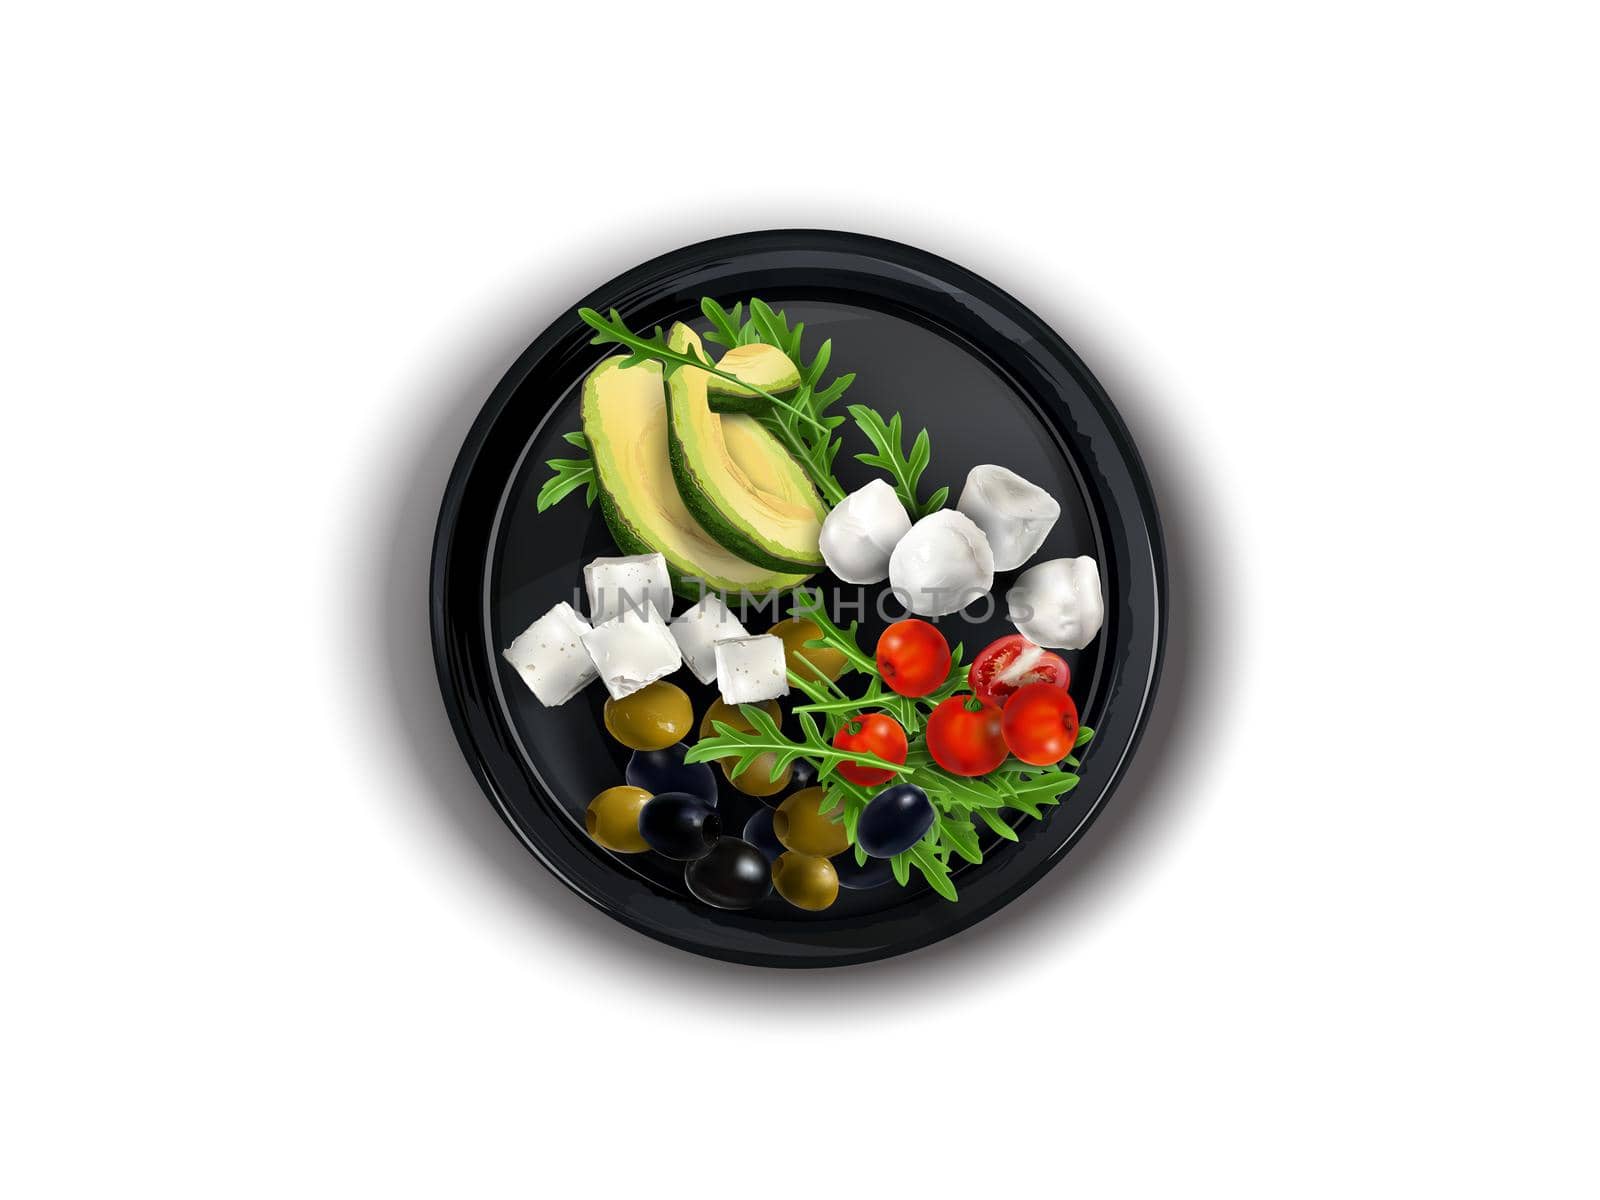 Black plate with Feta and Mozzarella cheese, avocado, tomatoes and olives on a white background, top view. Realistic style illustration.